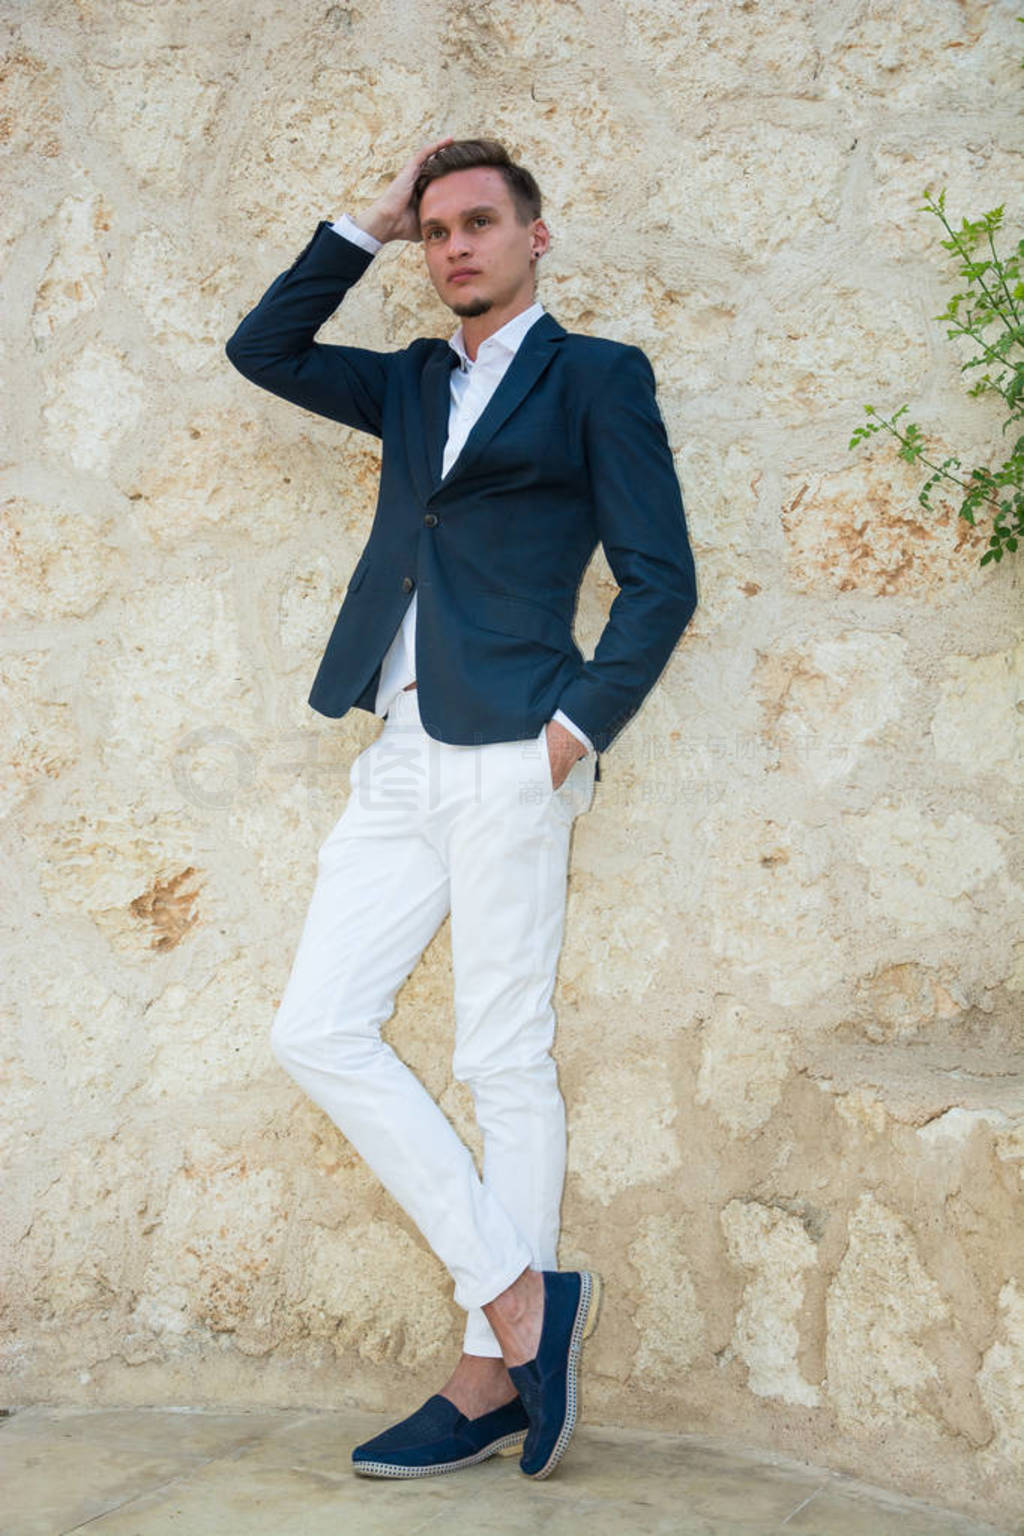 Young handsome man in a suit and white pants at standing near a